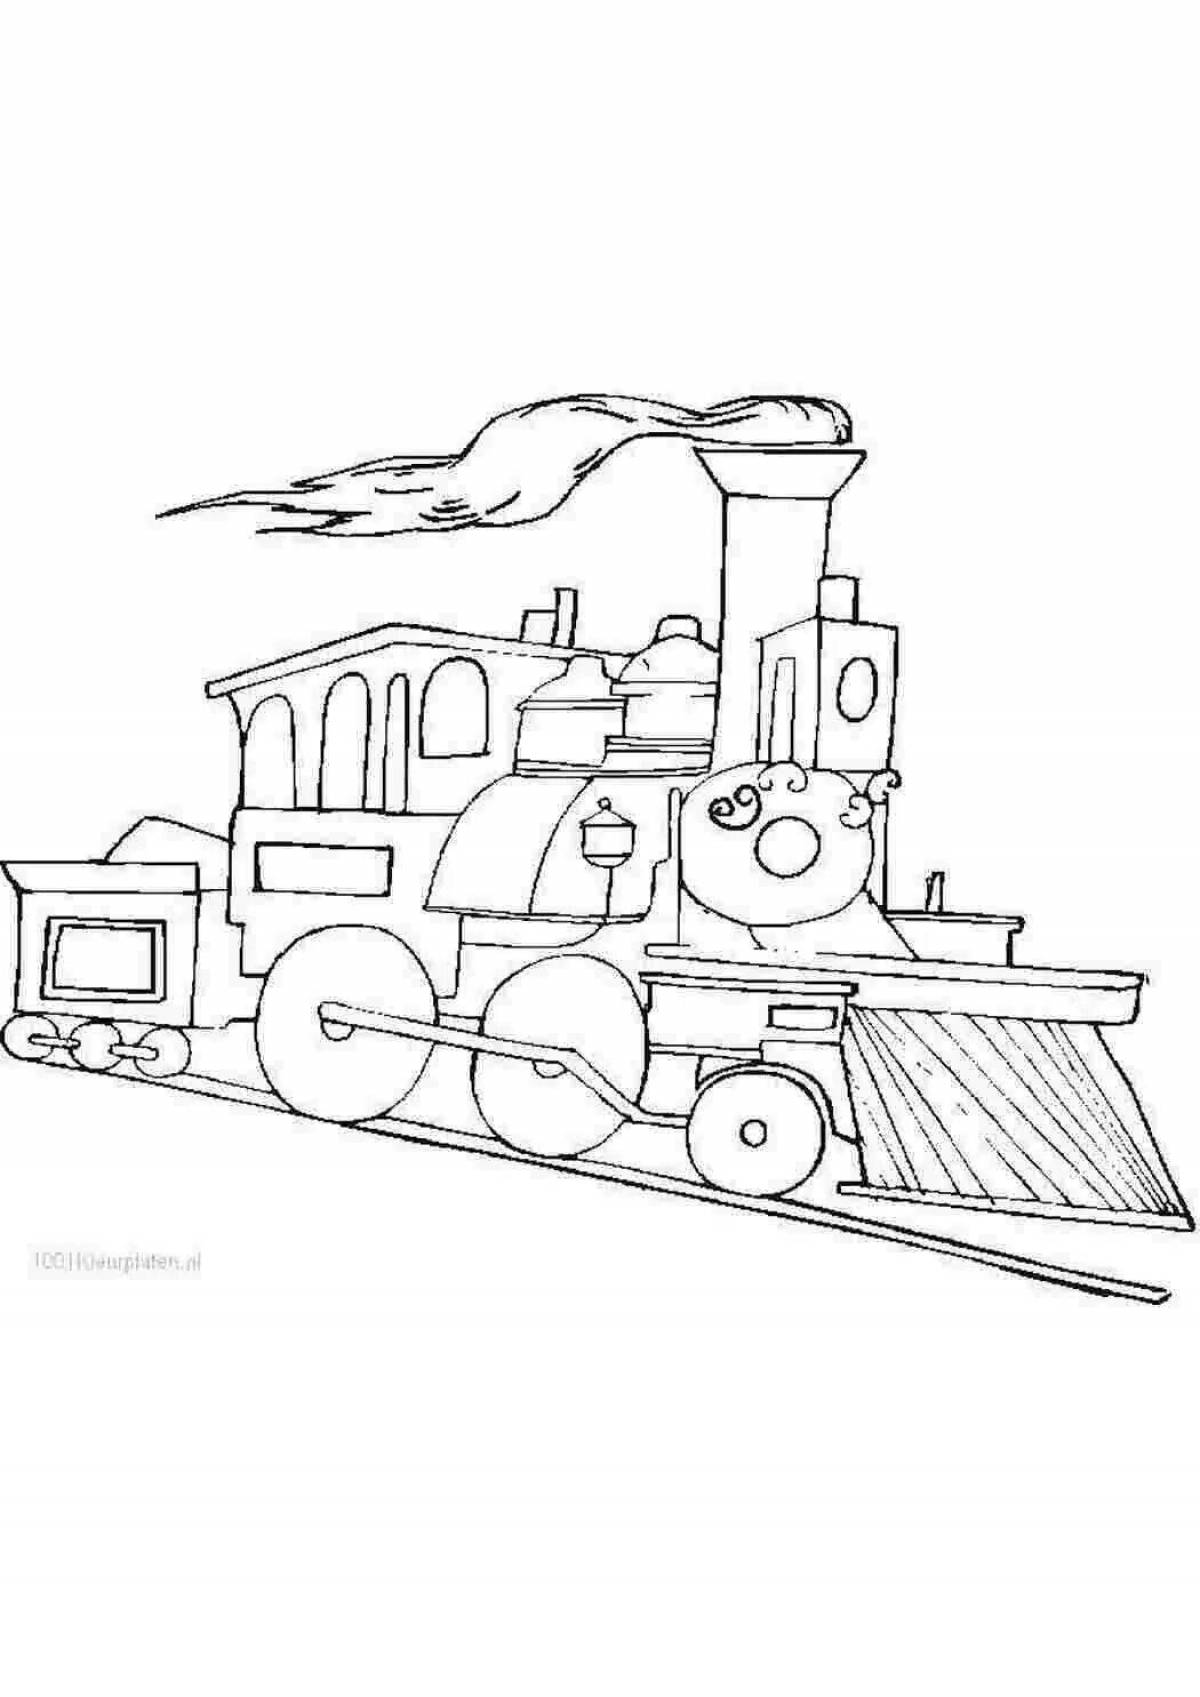 Brilliant railway transport coloring page